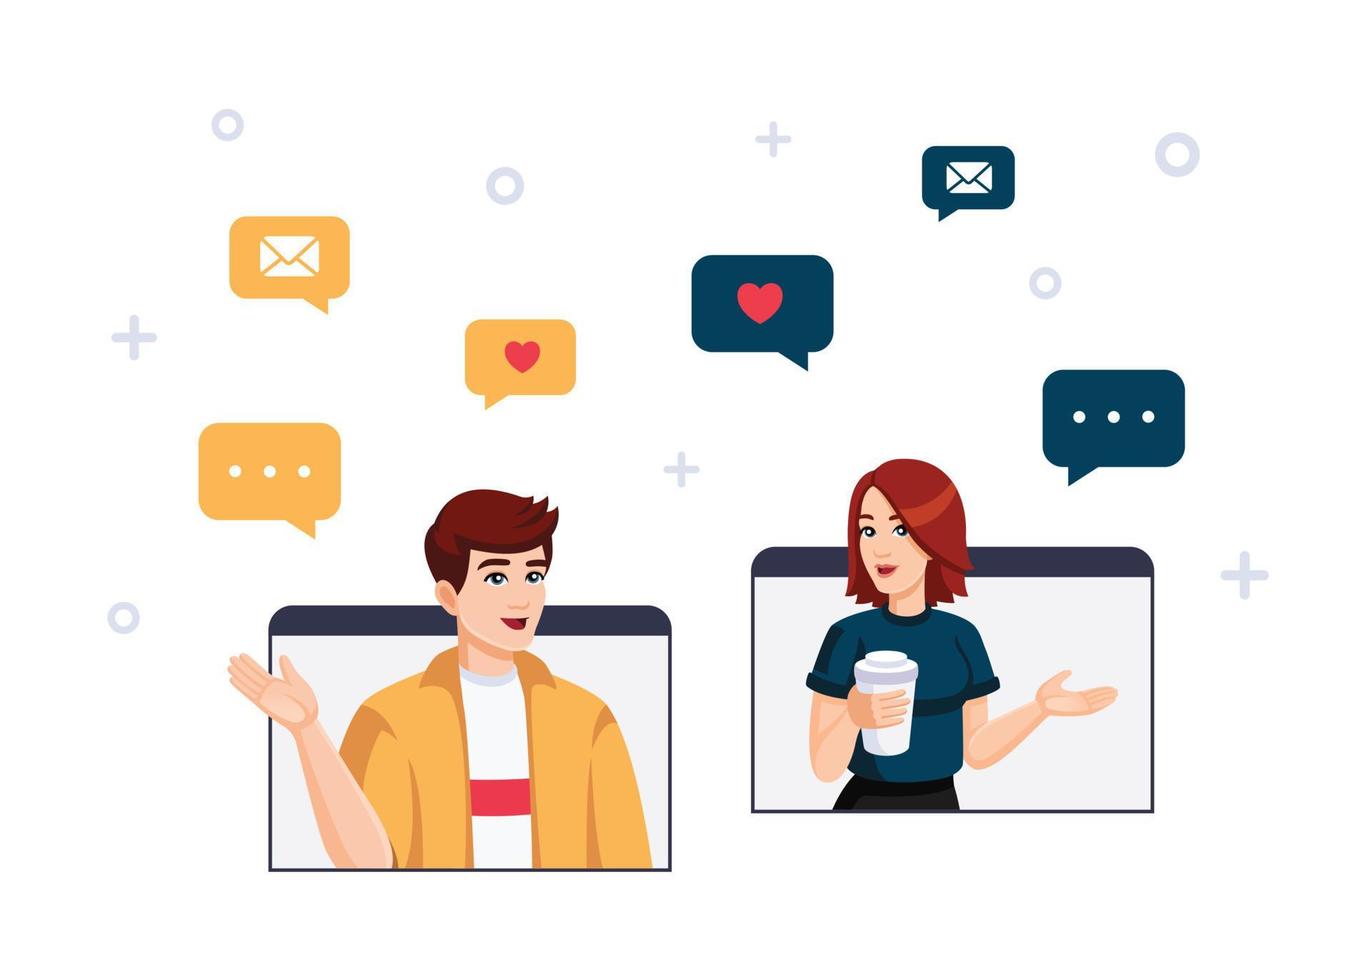 Vector flat illustration about social networks, video conference, chatting, online dating, online communication. Girl and Boy are talking by videoconference